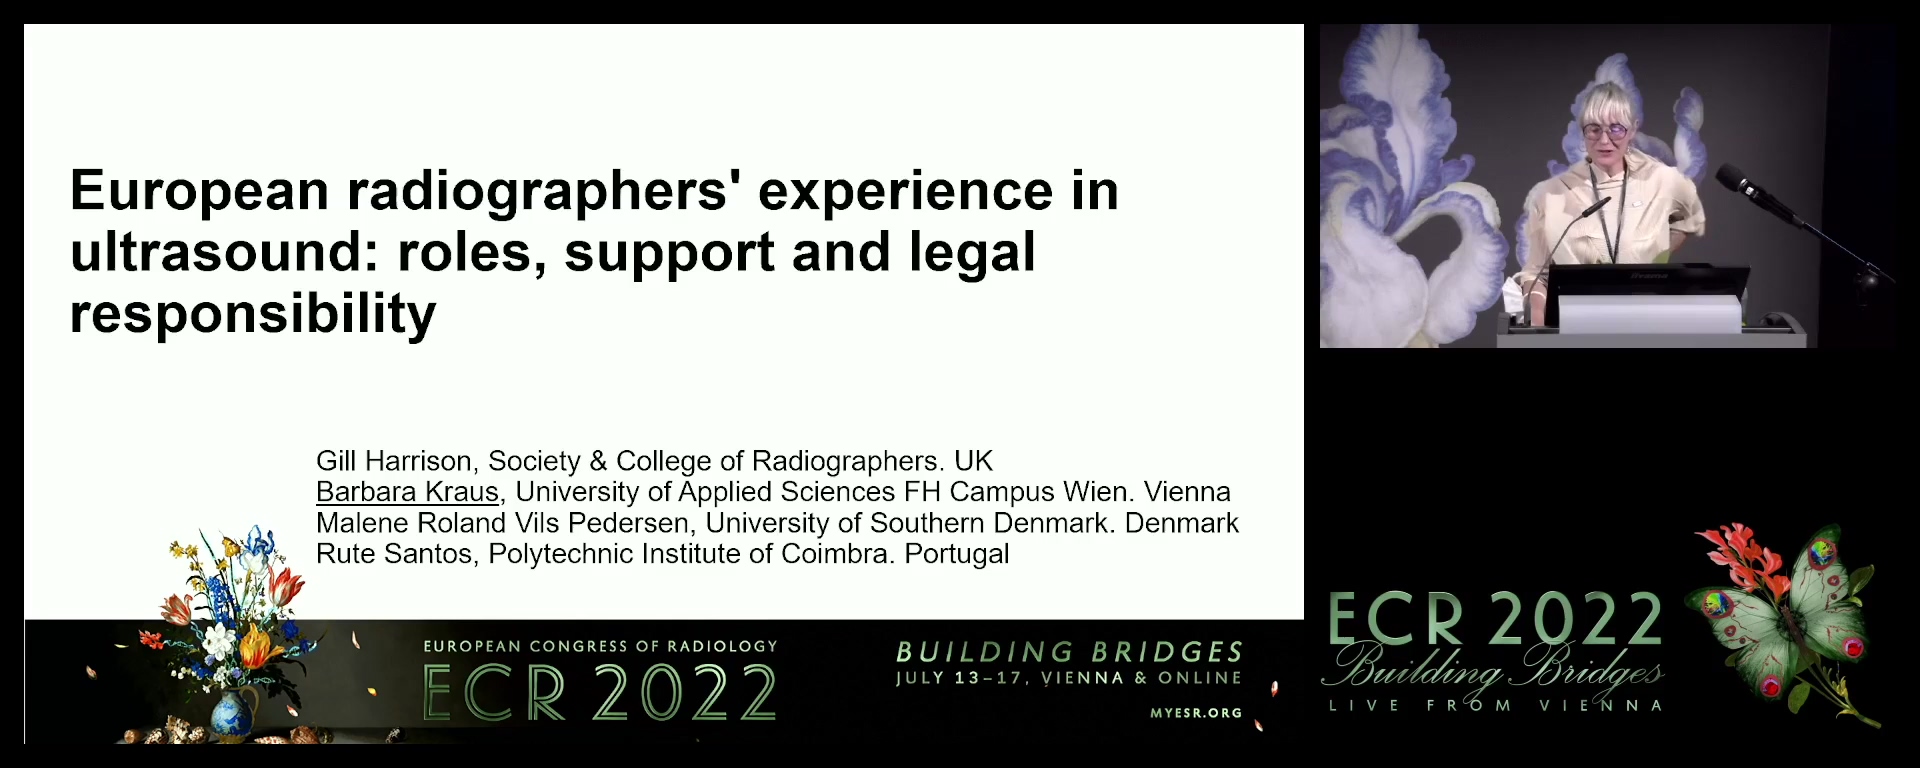 European radiographers' experience in ultrasound: roles, support and legal responsibility - Barbara Kraus, Wolkersdorf / AT